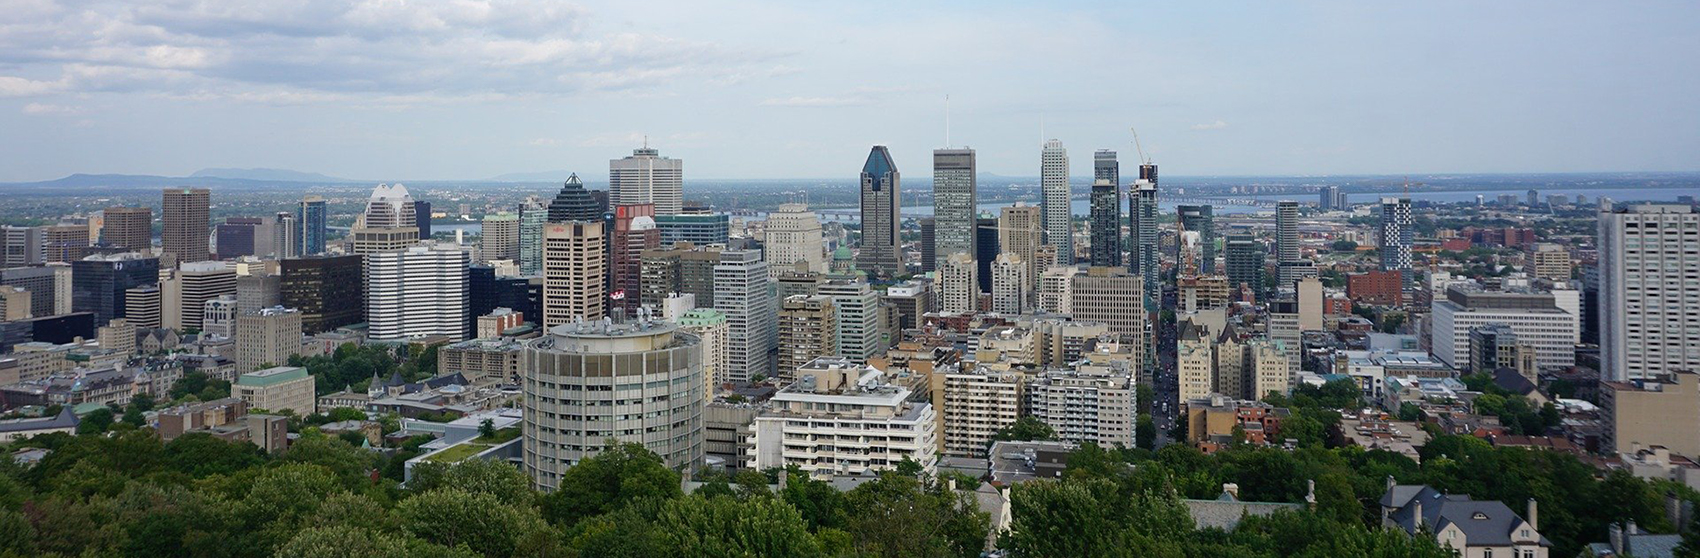 montreal-2688393_1920